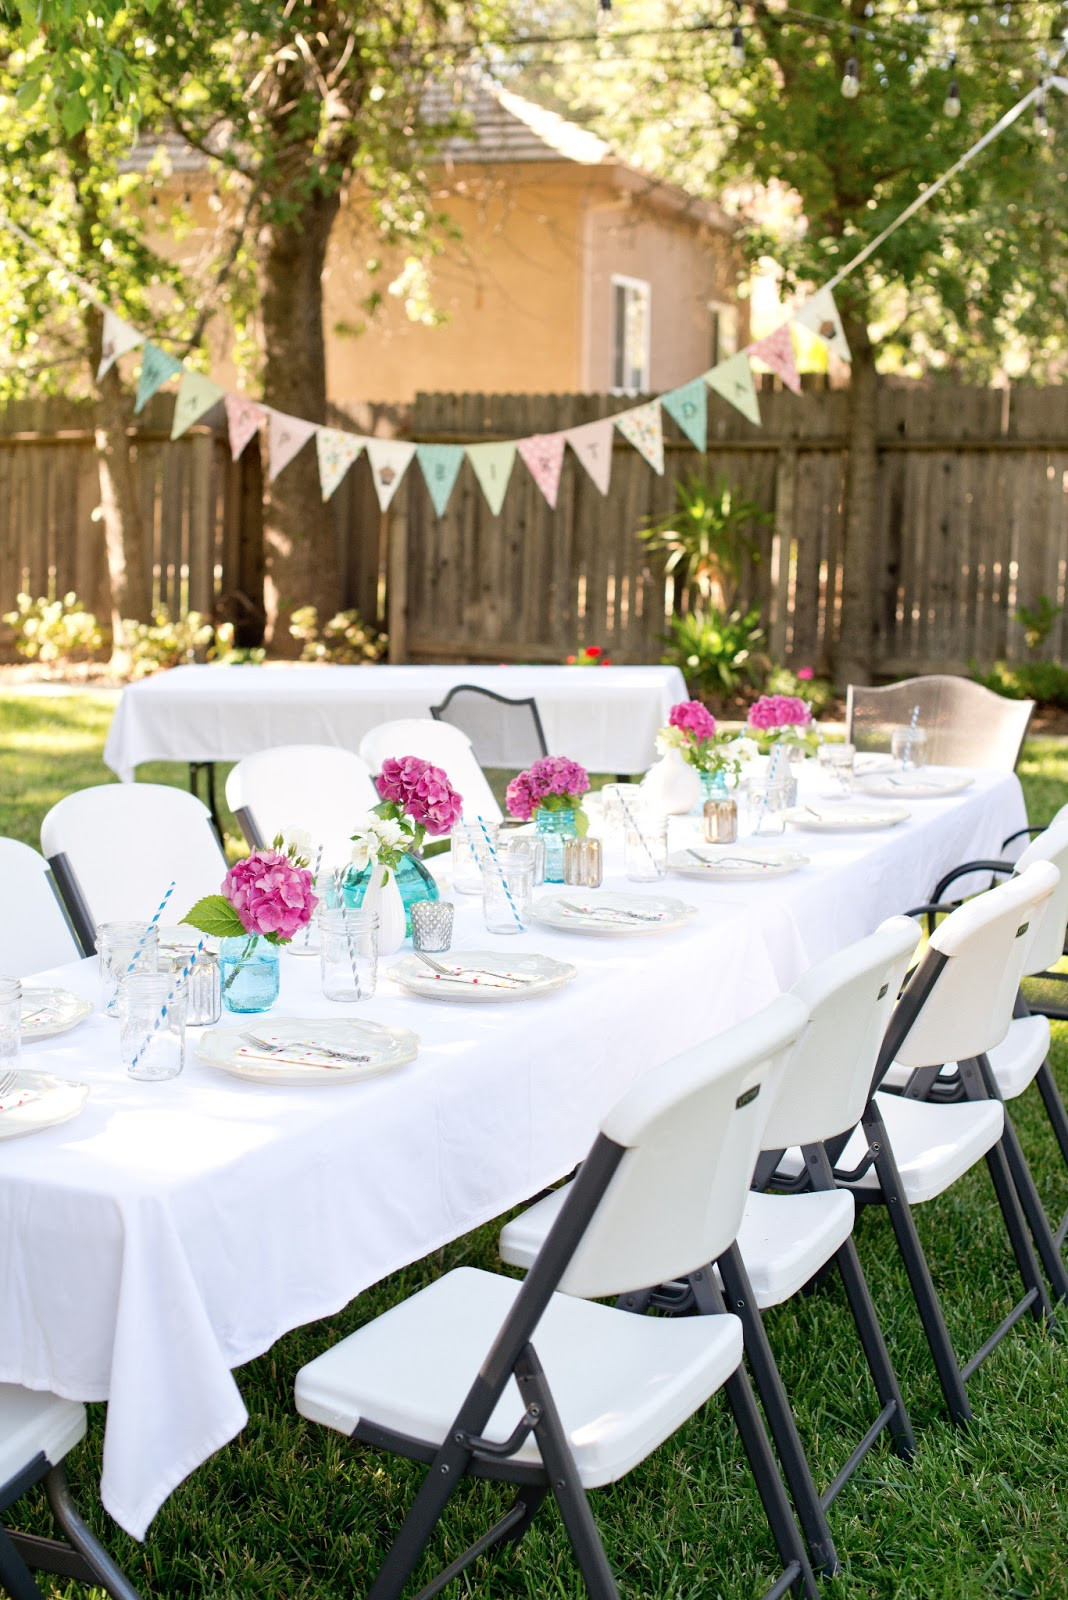 Backyard Party Decorating Ideas Pinterest
 Backyard Party Decorations For Unfor table Moments